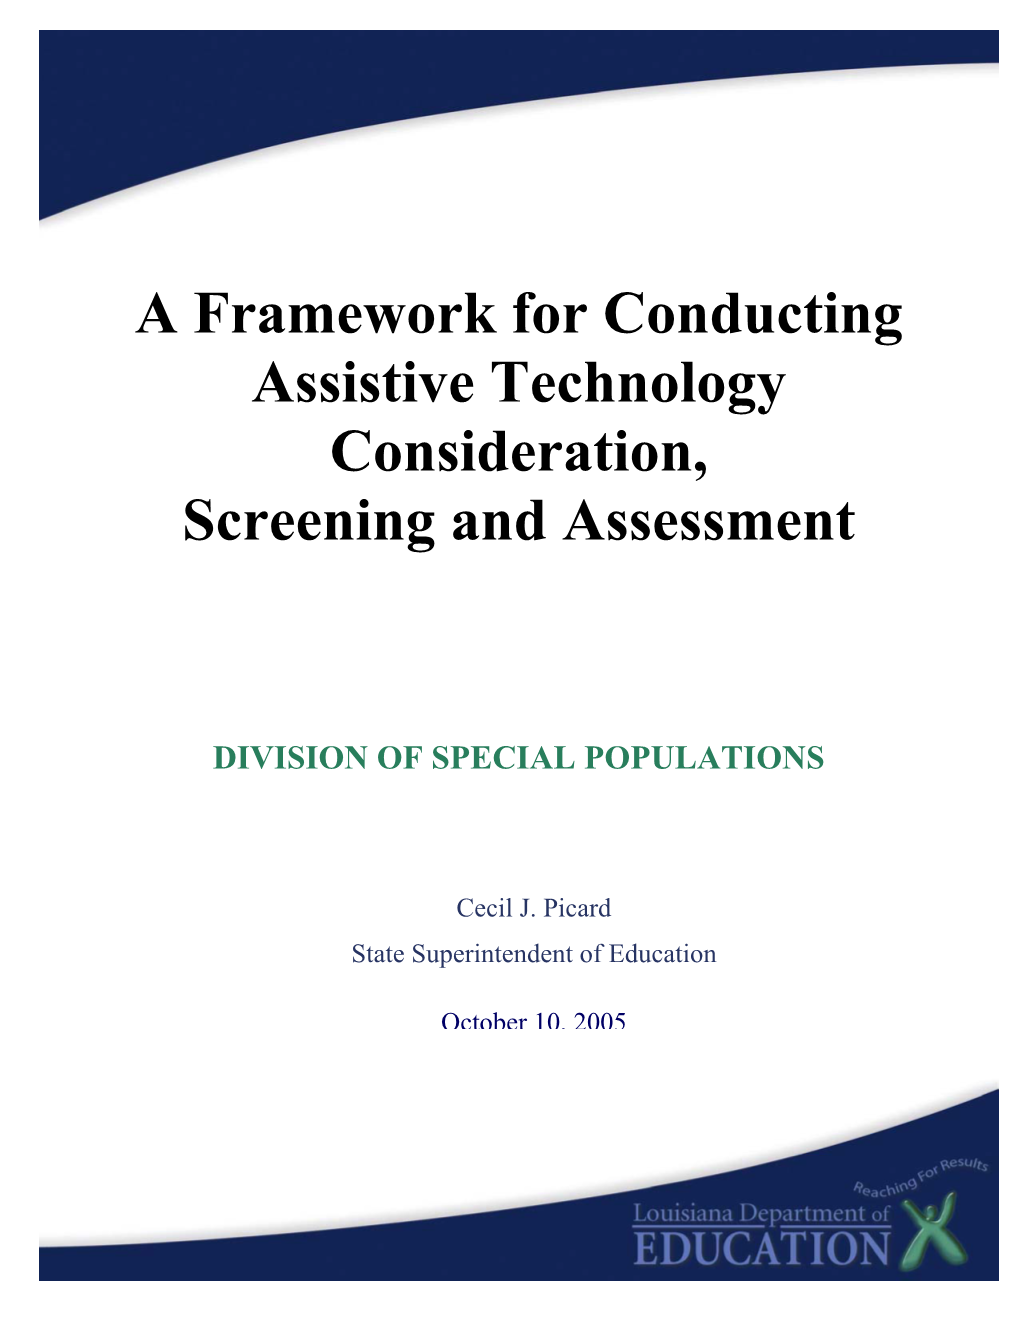 Framework of the at Consideration, Screening and Assessment